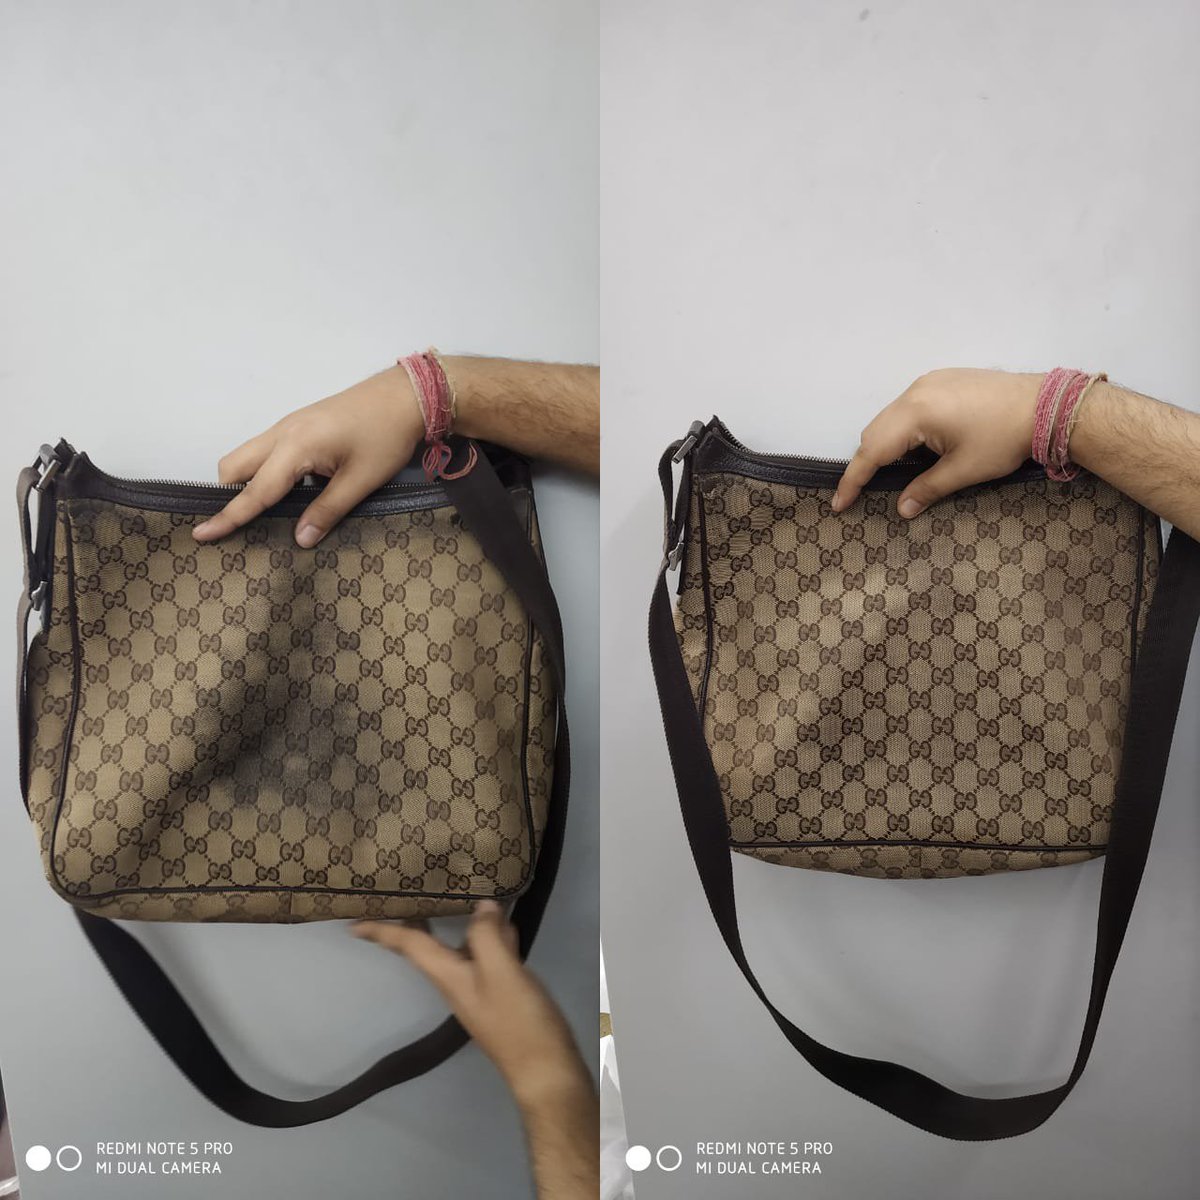 how to wash a gucci bag